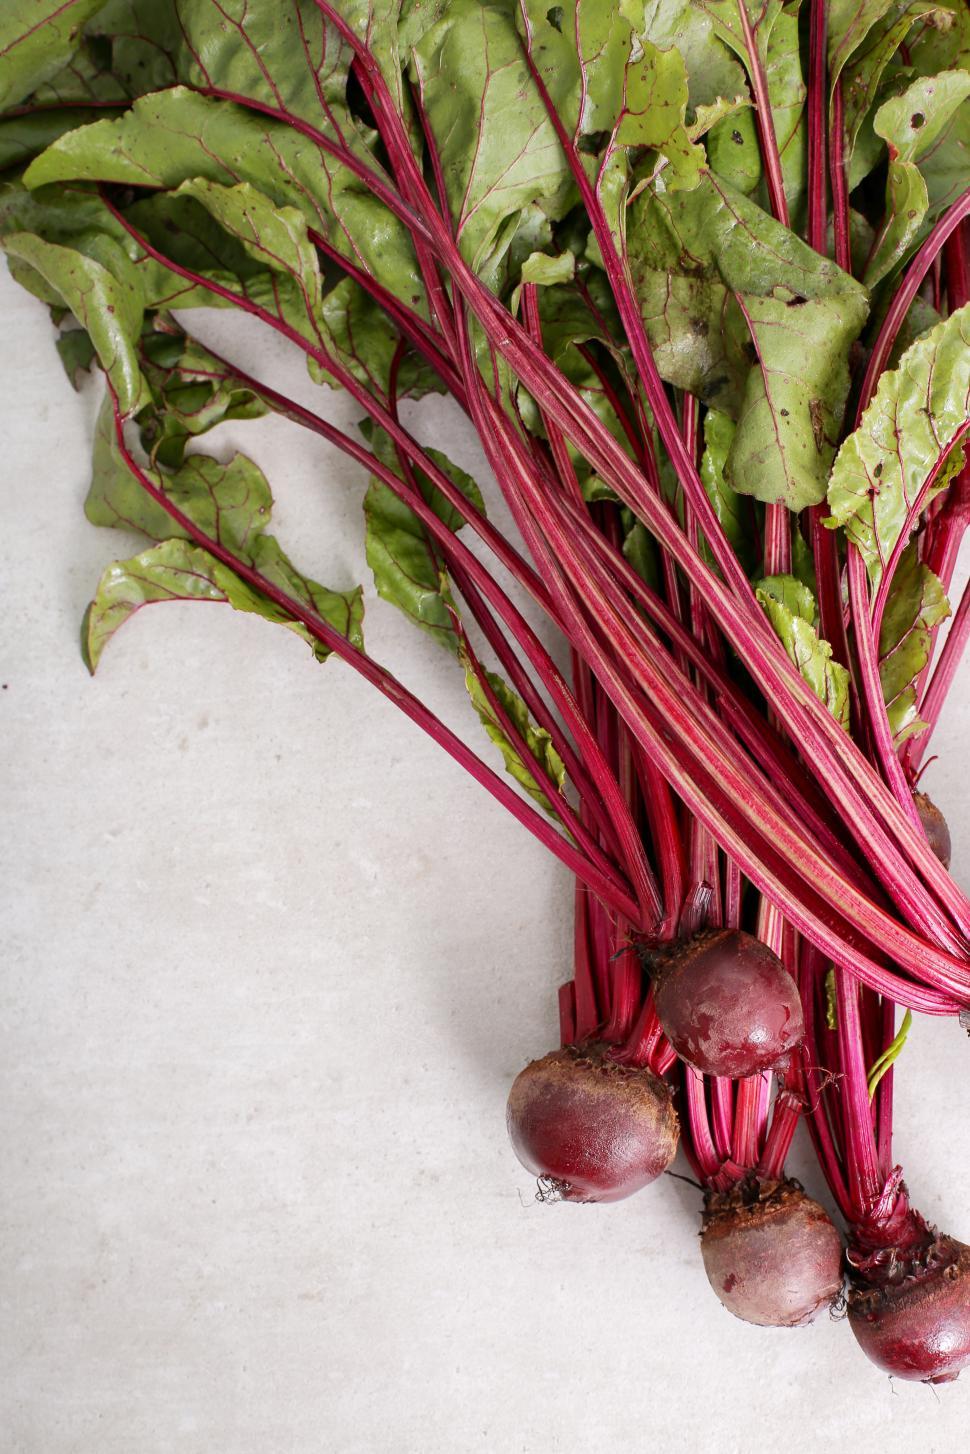 Free Image of Beets with greens 